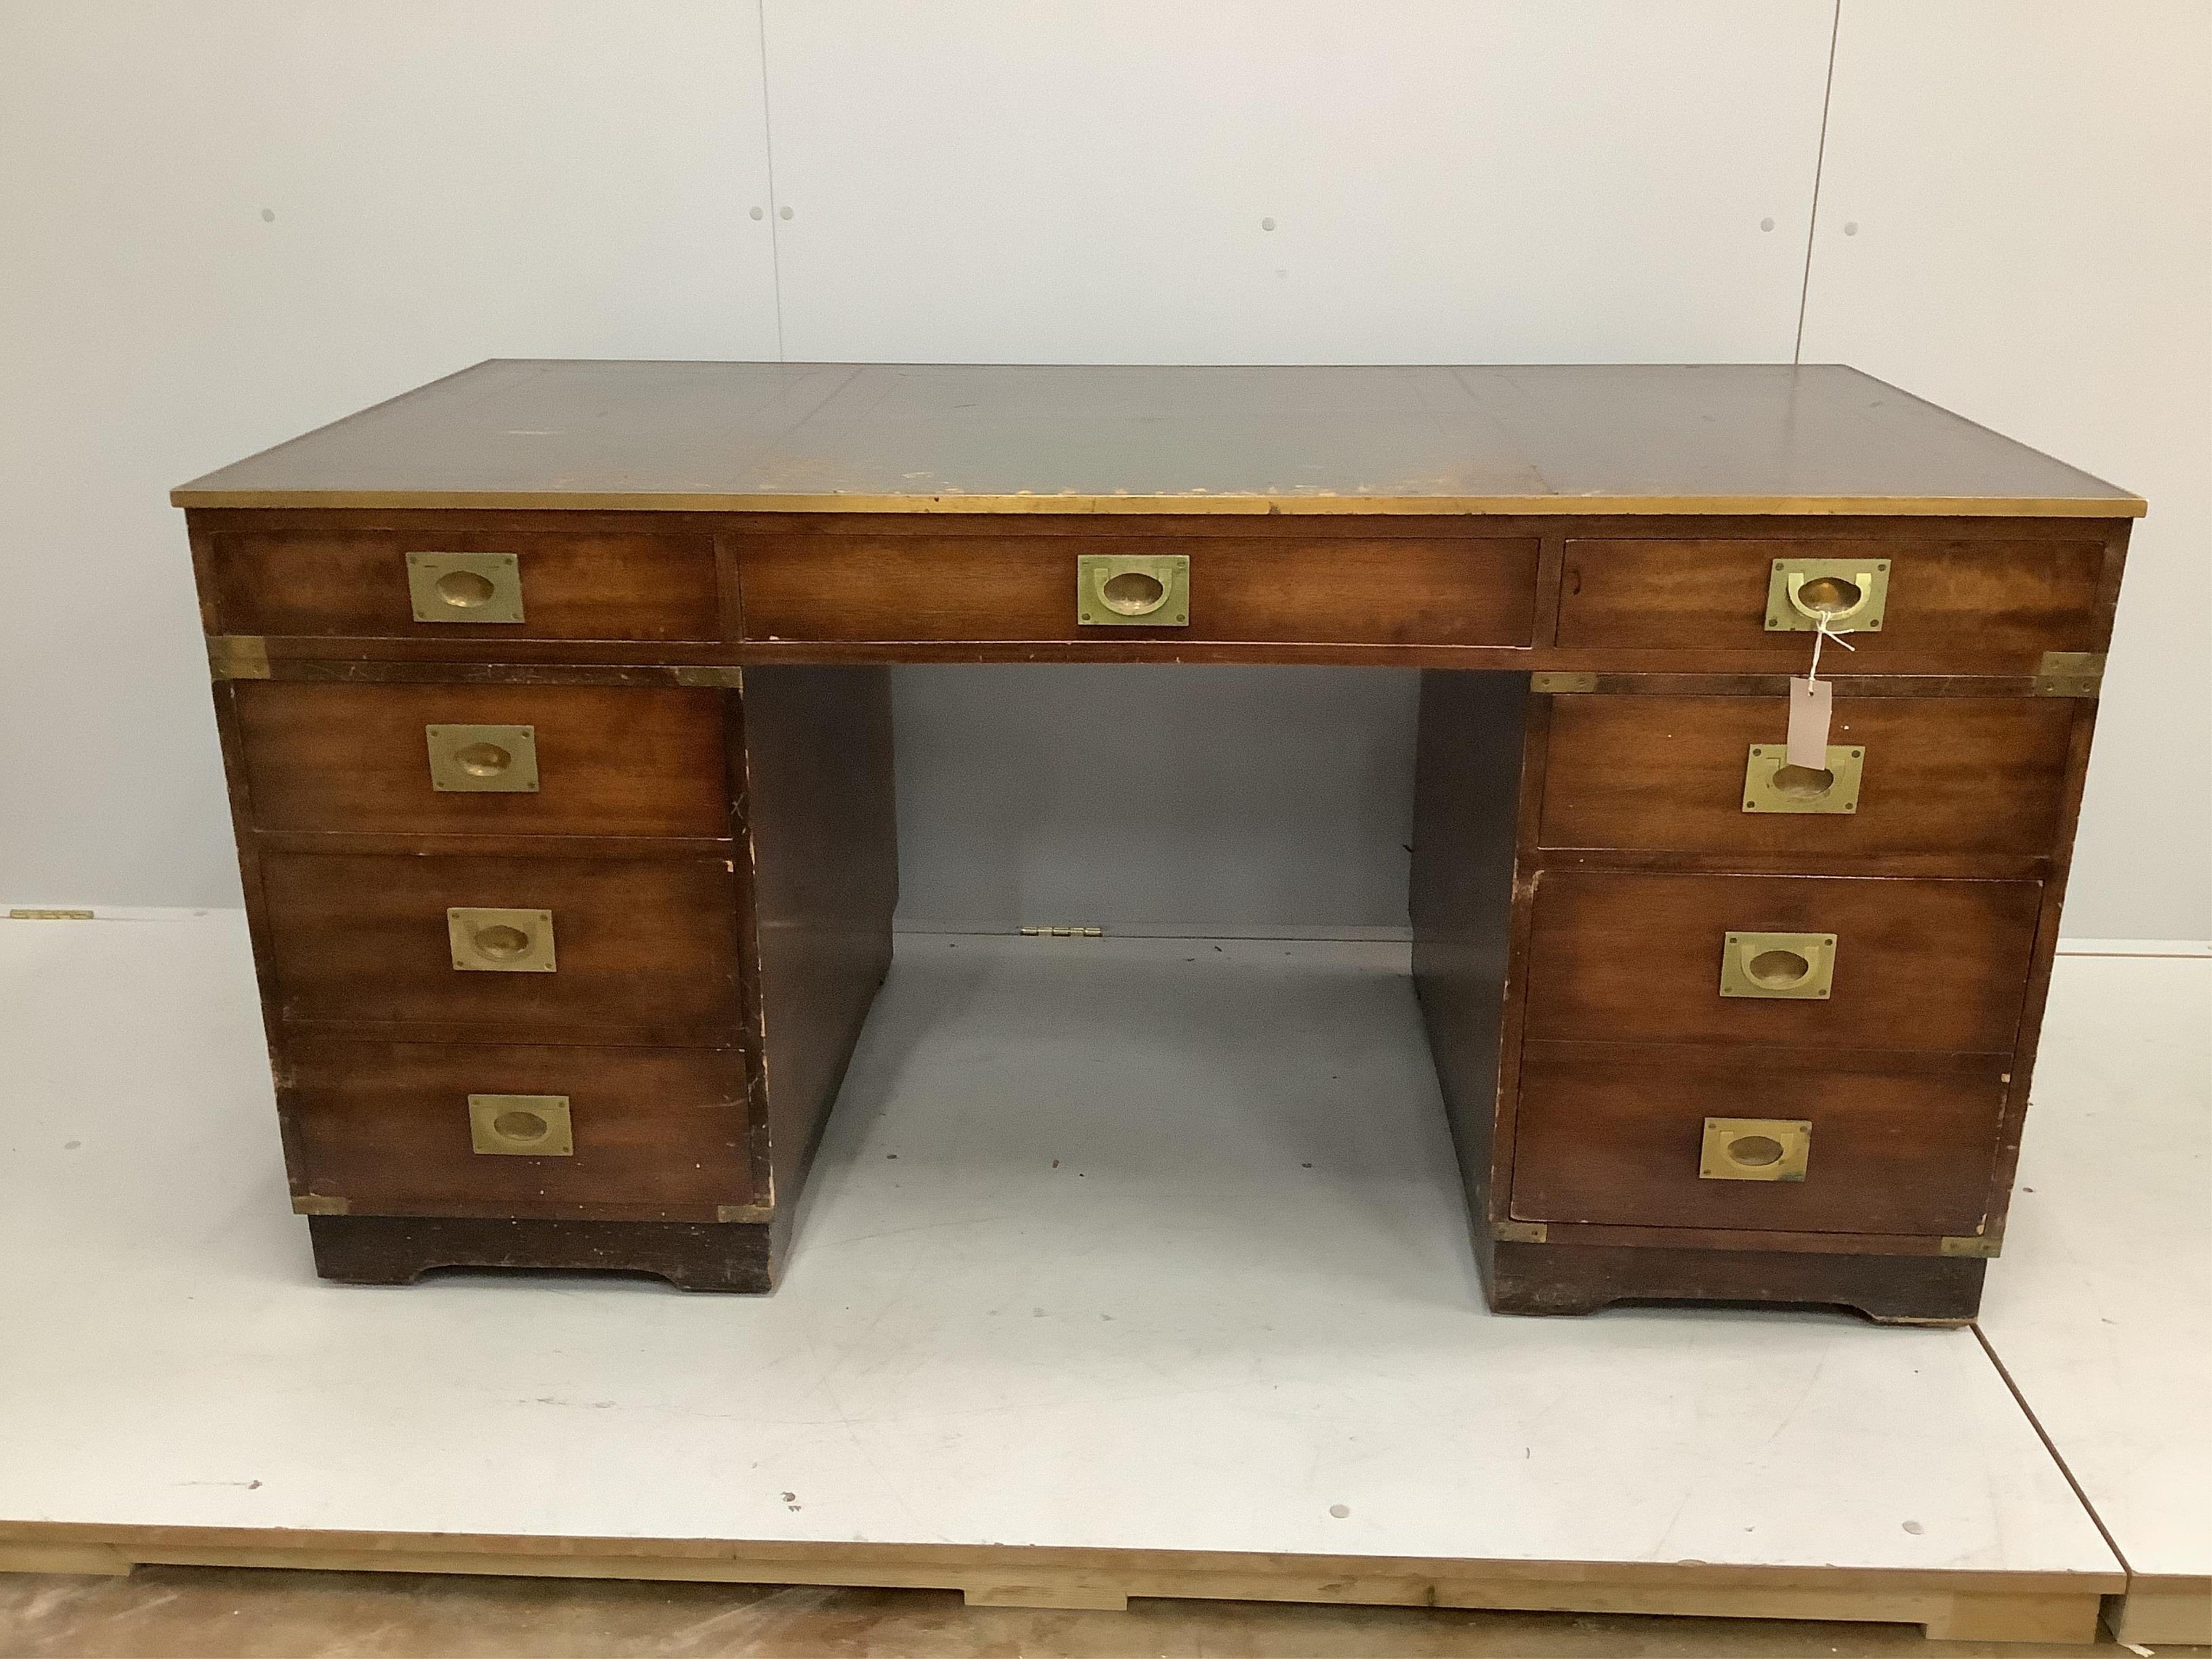 A mid century brass mounted military style mahogany twin pedestal desk, width 153cm, depth 77cm, height 75cm. Condition - fair